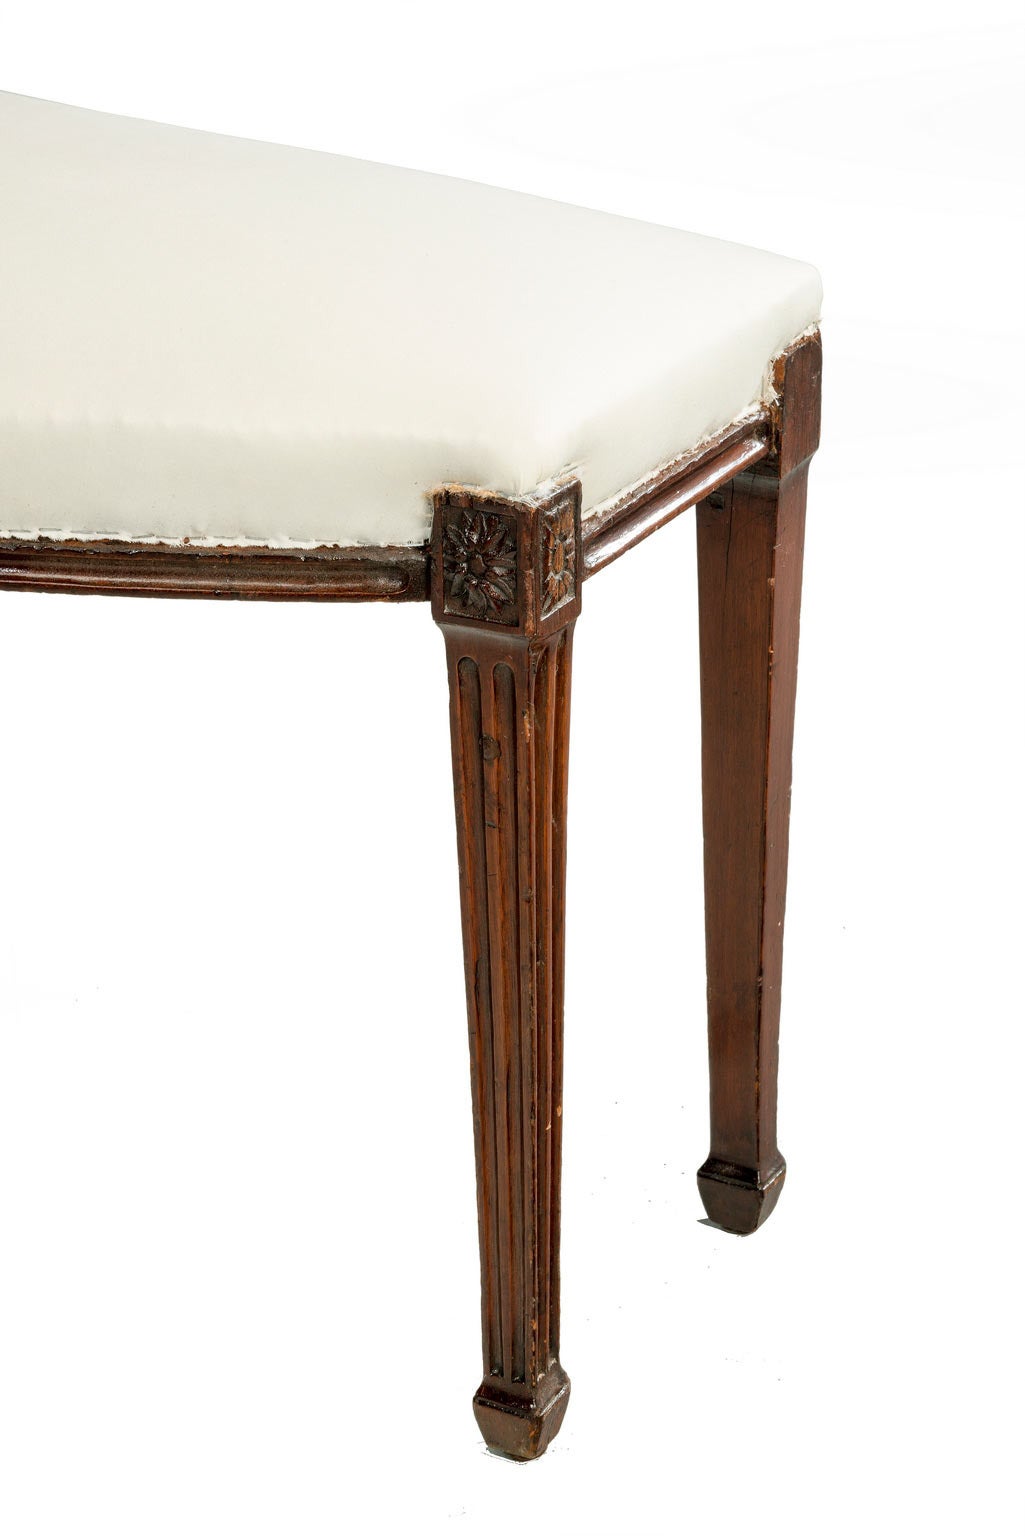 A George III Mahogany Bow front Window Seat. Tapering square supports, terminating in block feet.

RR